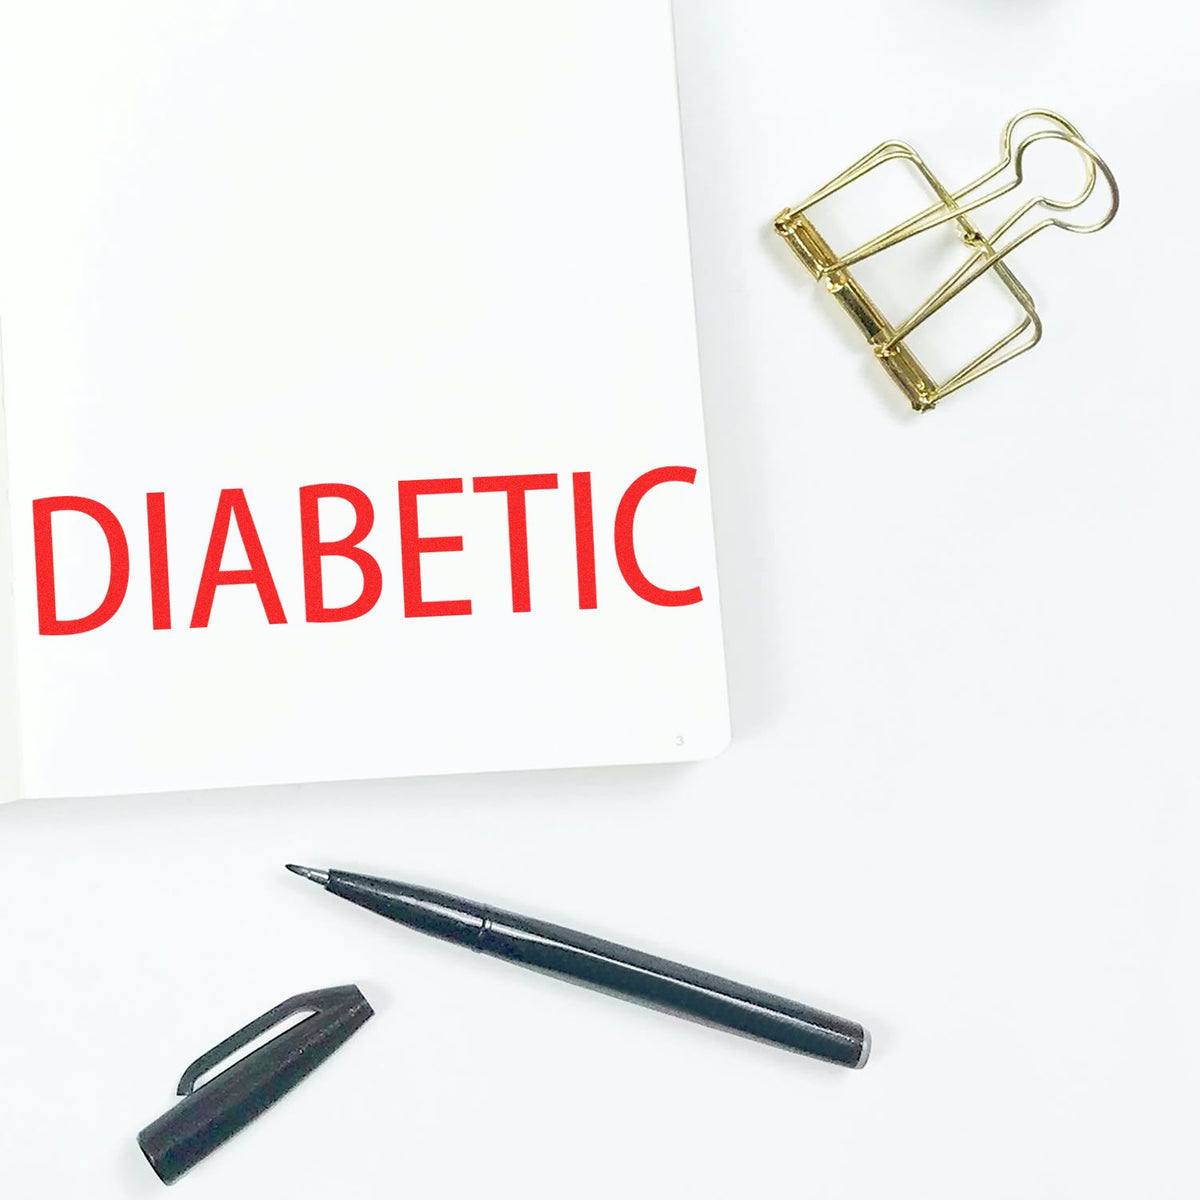 Diabetic Rubber Stamp In Use Photo